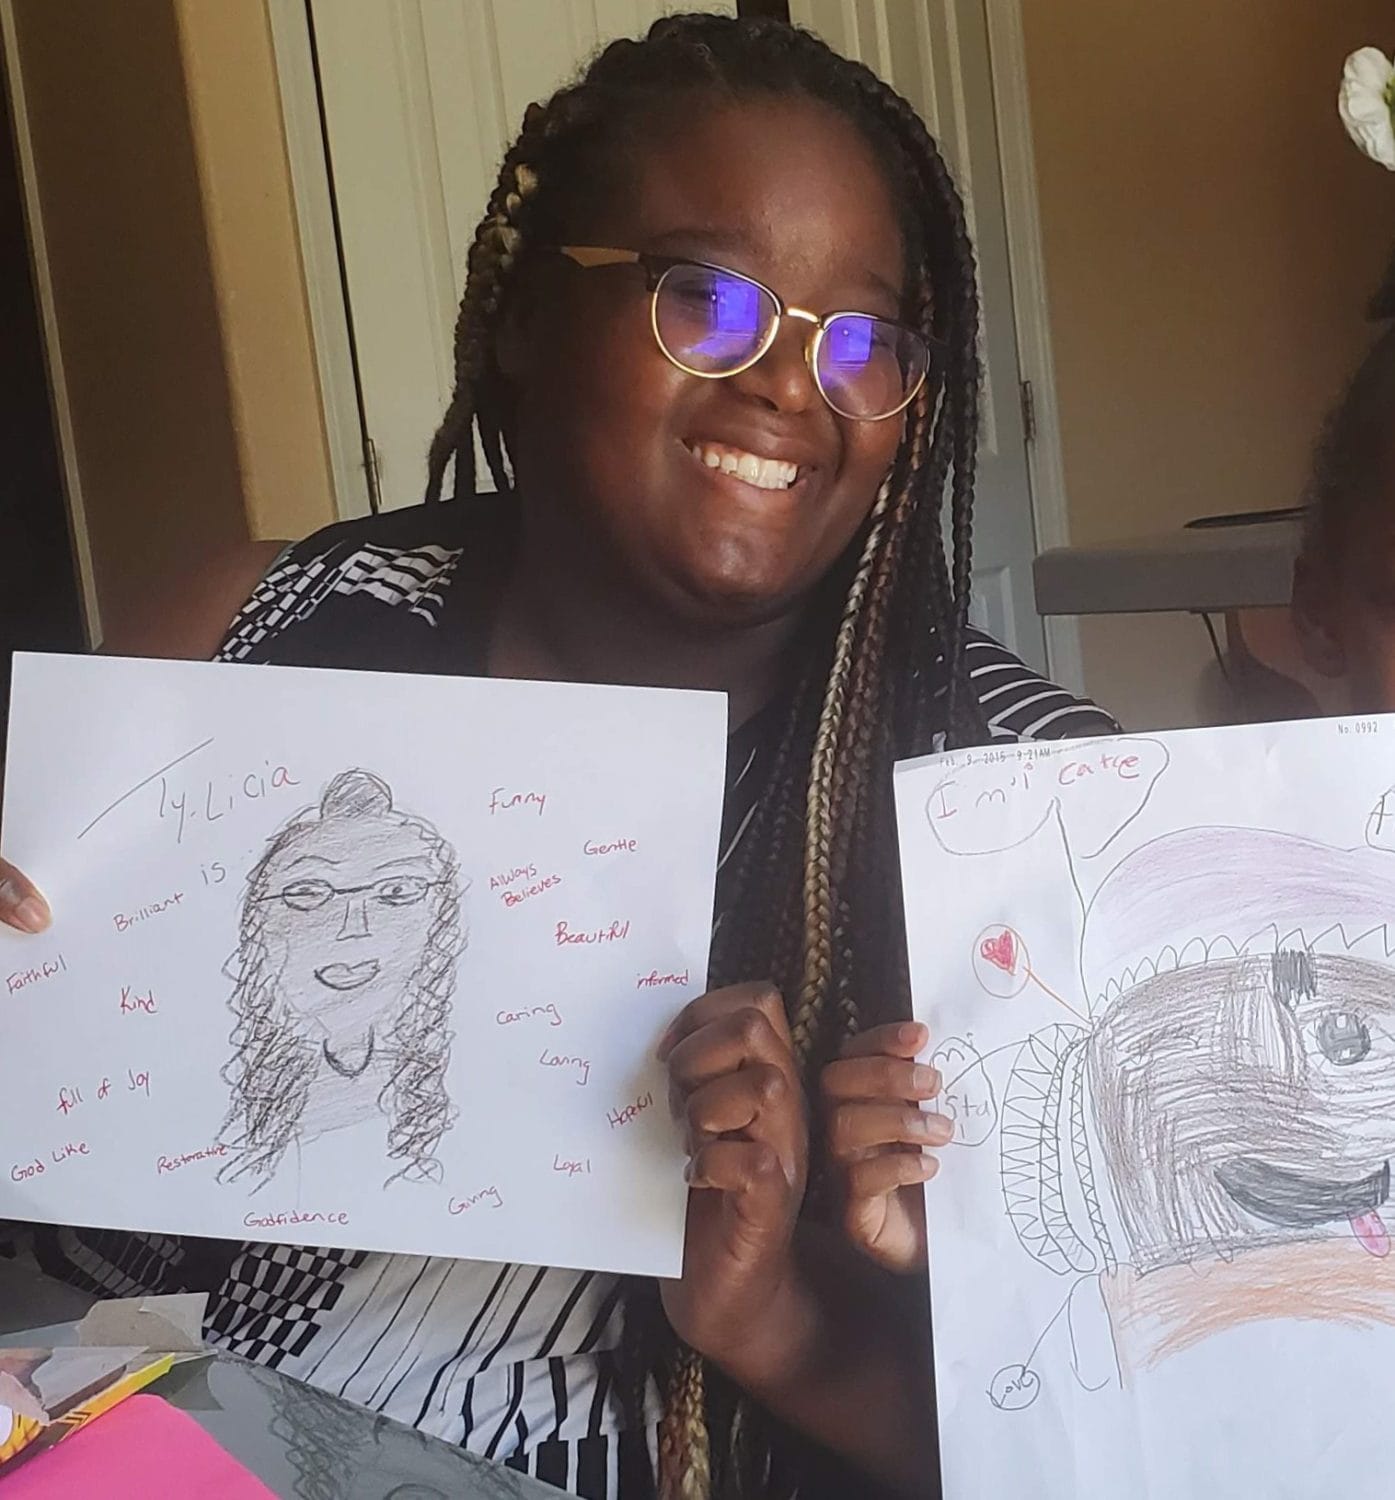 Ty-Licia-Hooker-shows-student-drawings, COVID-19: The digital education divide and its impact on low-income families, Local News & Views 